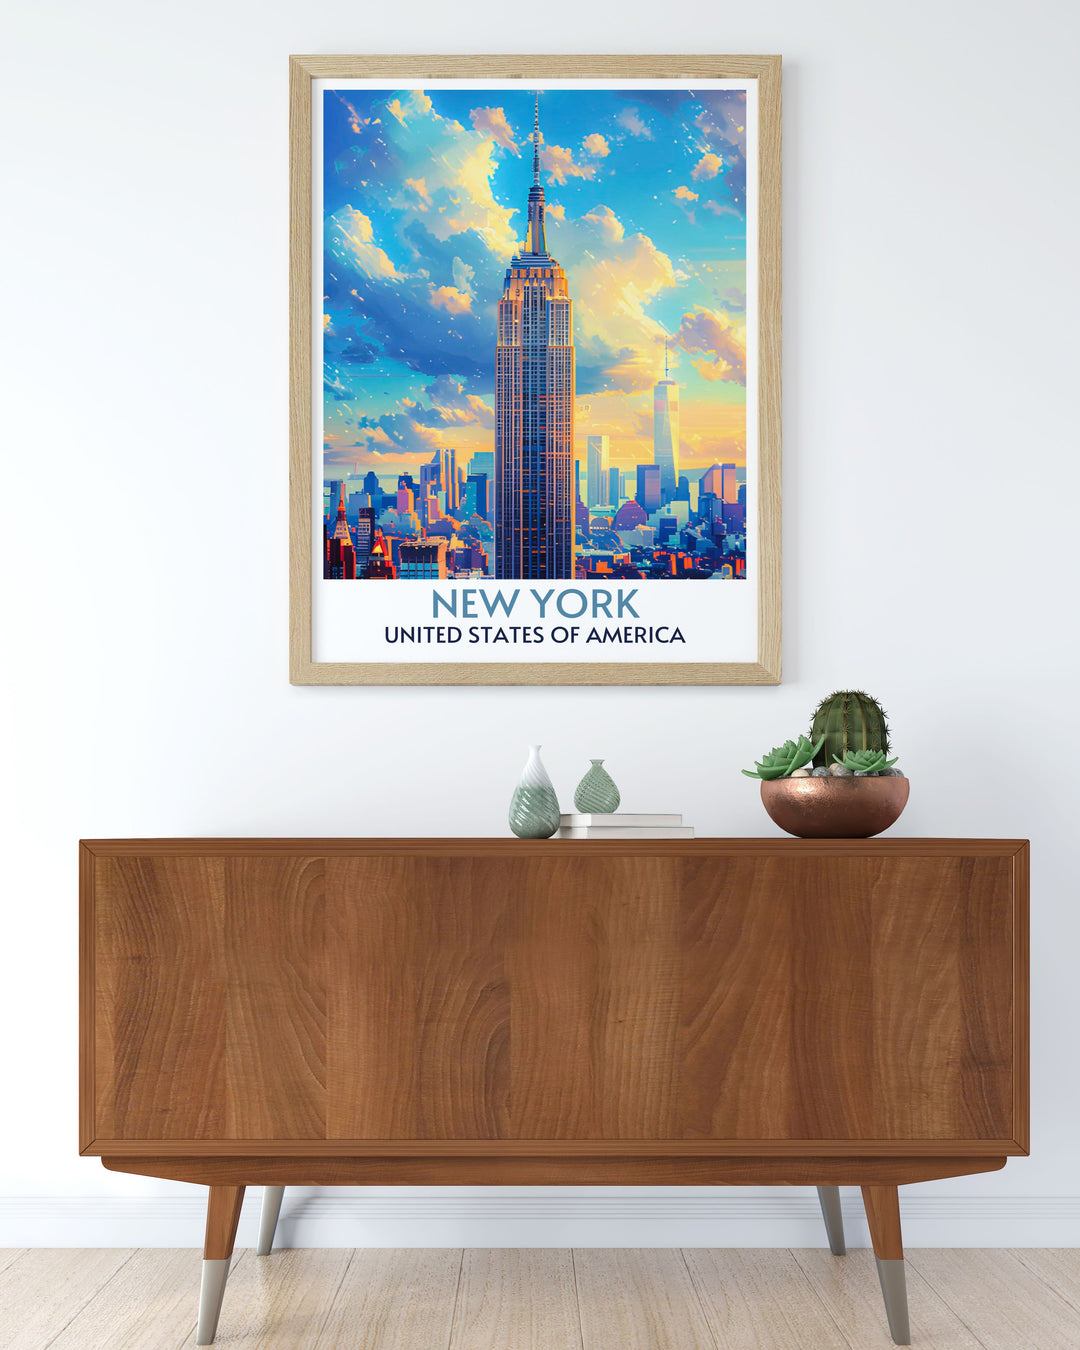 Travel poster of the Empire State Building, a must have for admirers of historic American architecture.